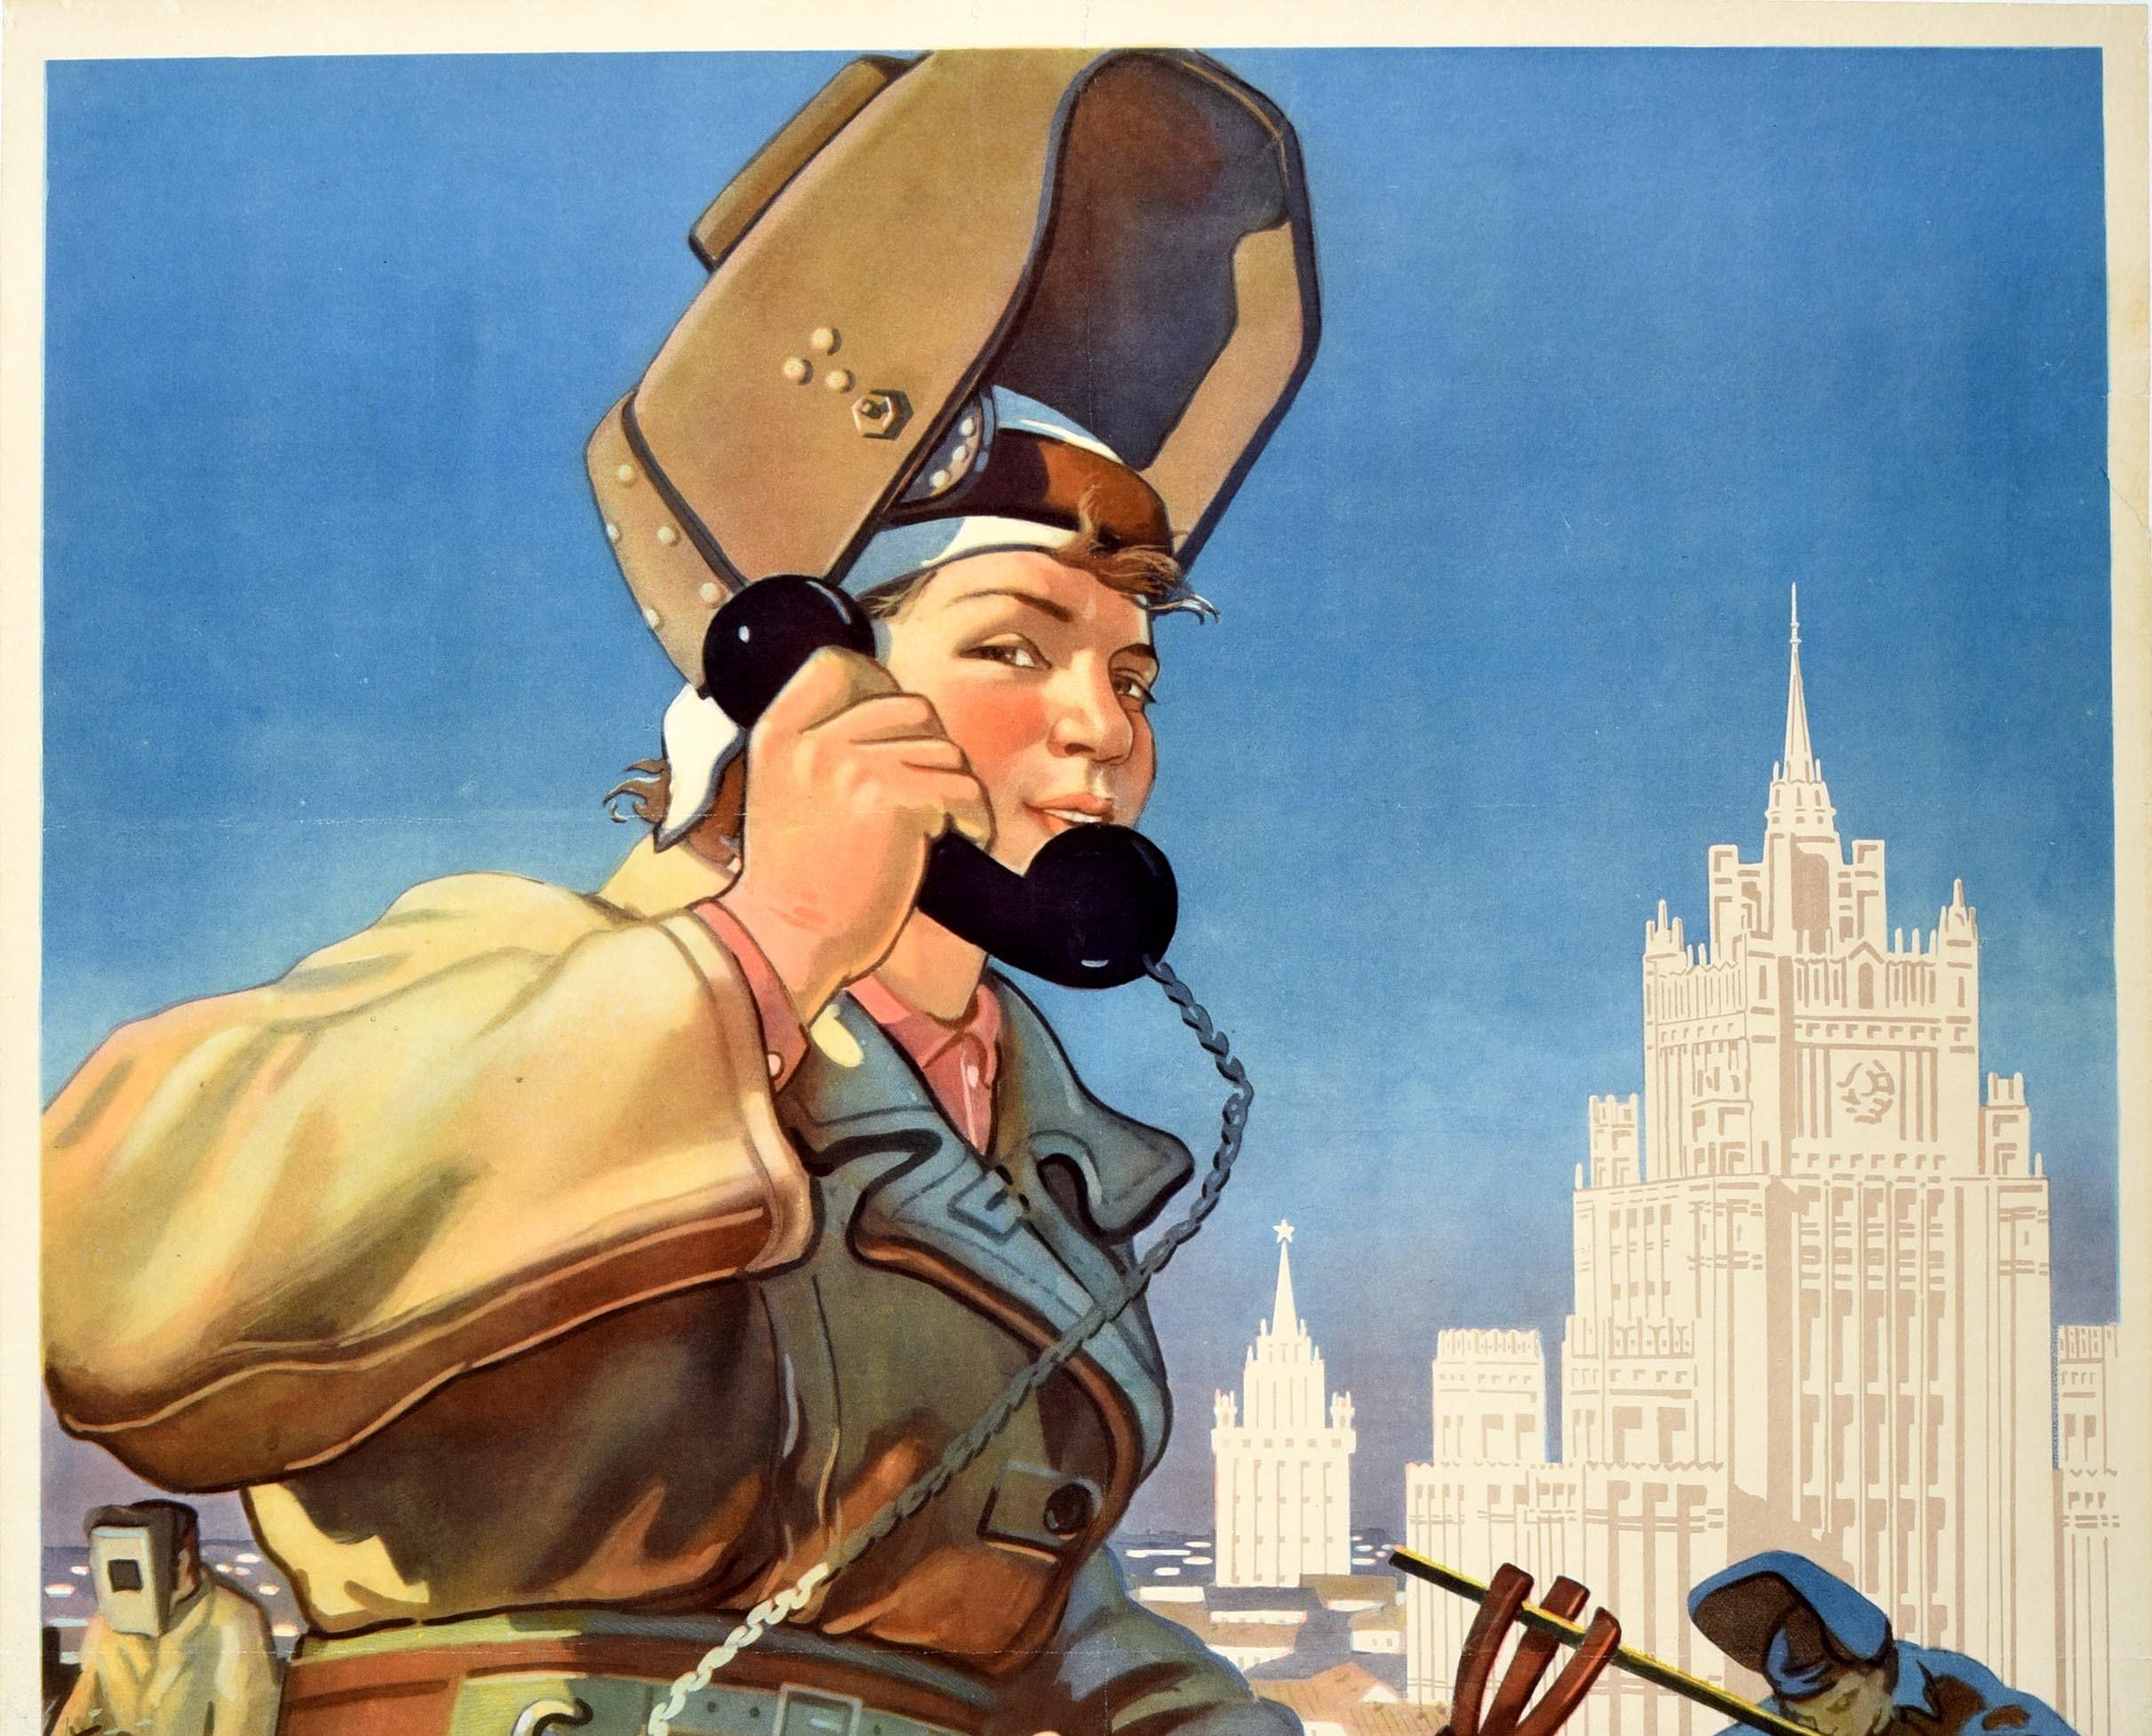 Original vintage Soviet motivation poster - We Completed the Quota and You? Great design featuring a skyscraper and Moscow city buildings in front of the blue sky in the background with construction workers on scaffolding in the foreground, a welder